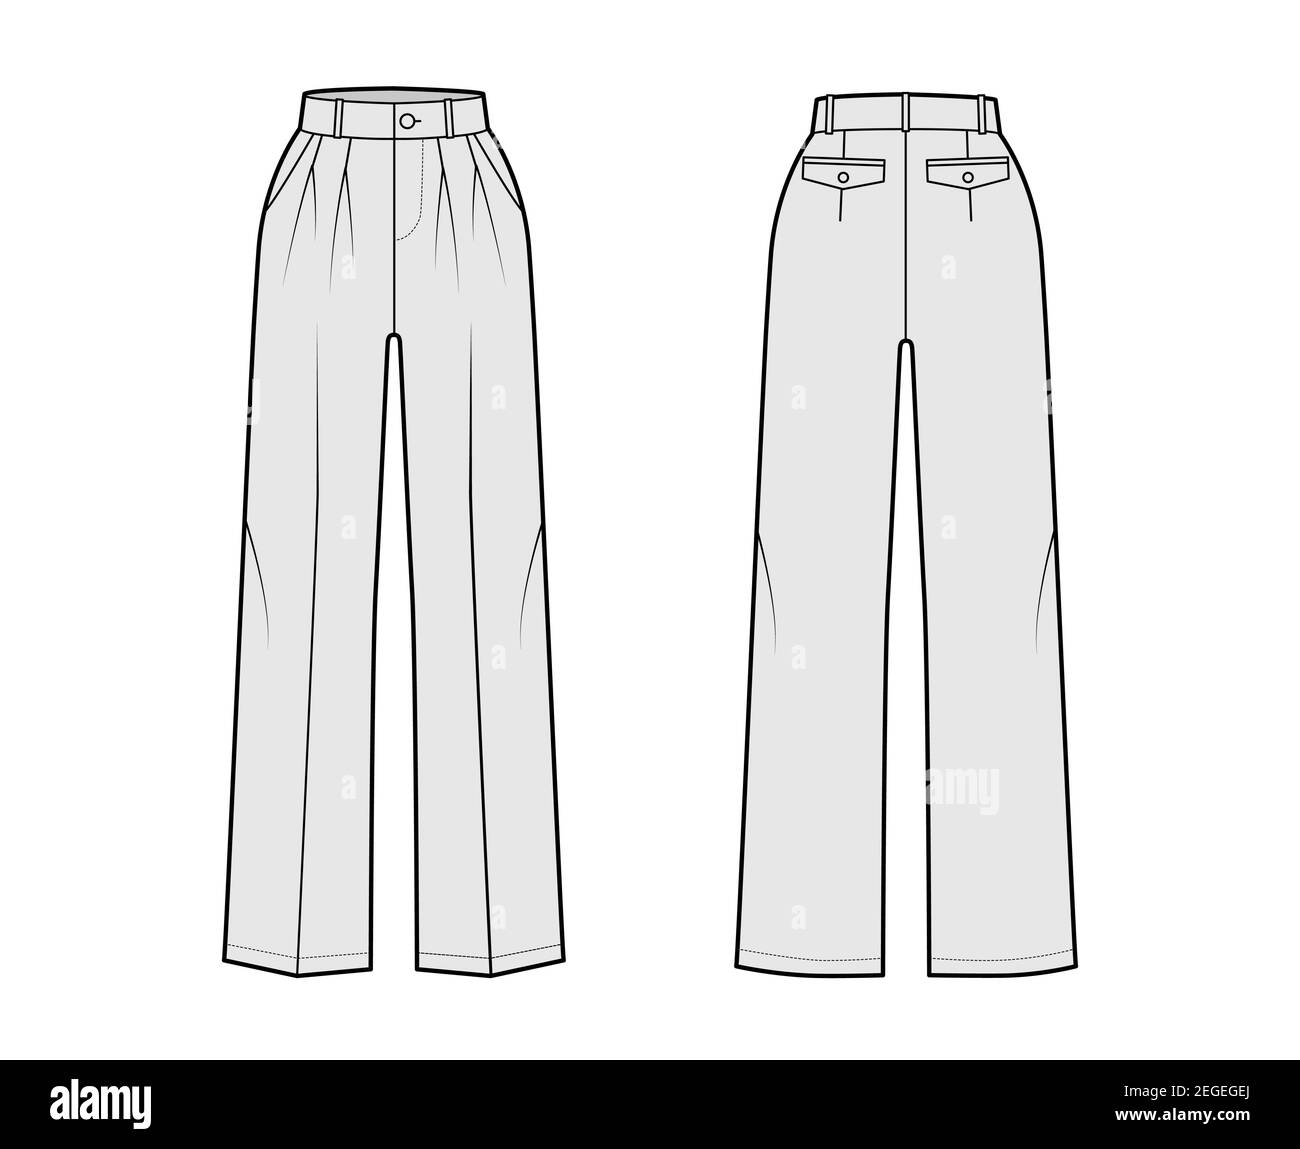 Cigarette pants technical drawing Stock Vector Images - Alamy